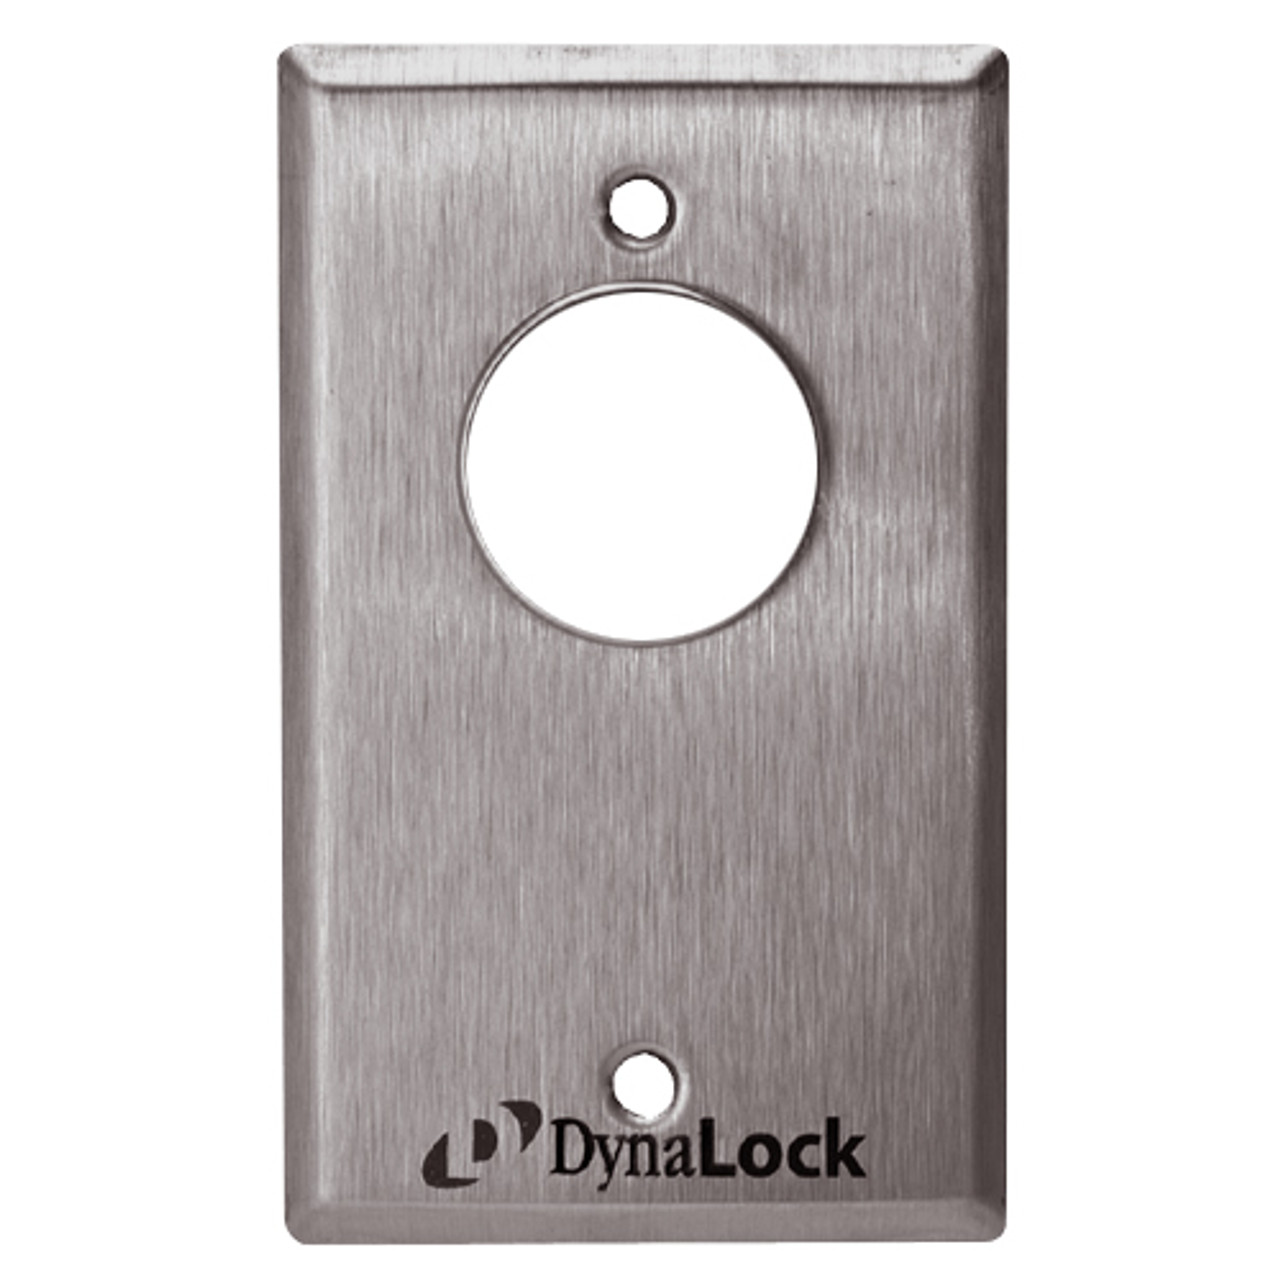 7023-US32D DynaLock 7000 Series Keyswitches Maintained 2 Double Pole Double Throw in Satin Stainless Steel